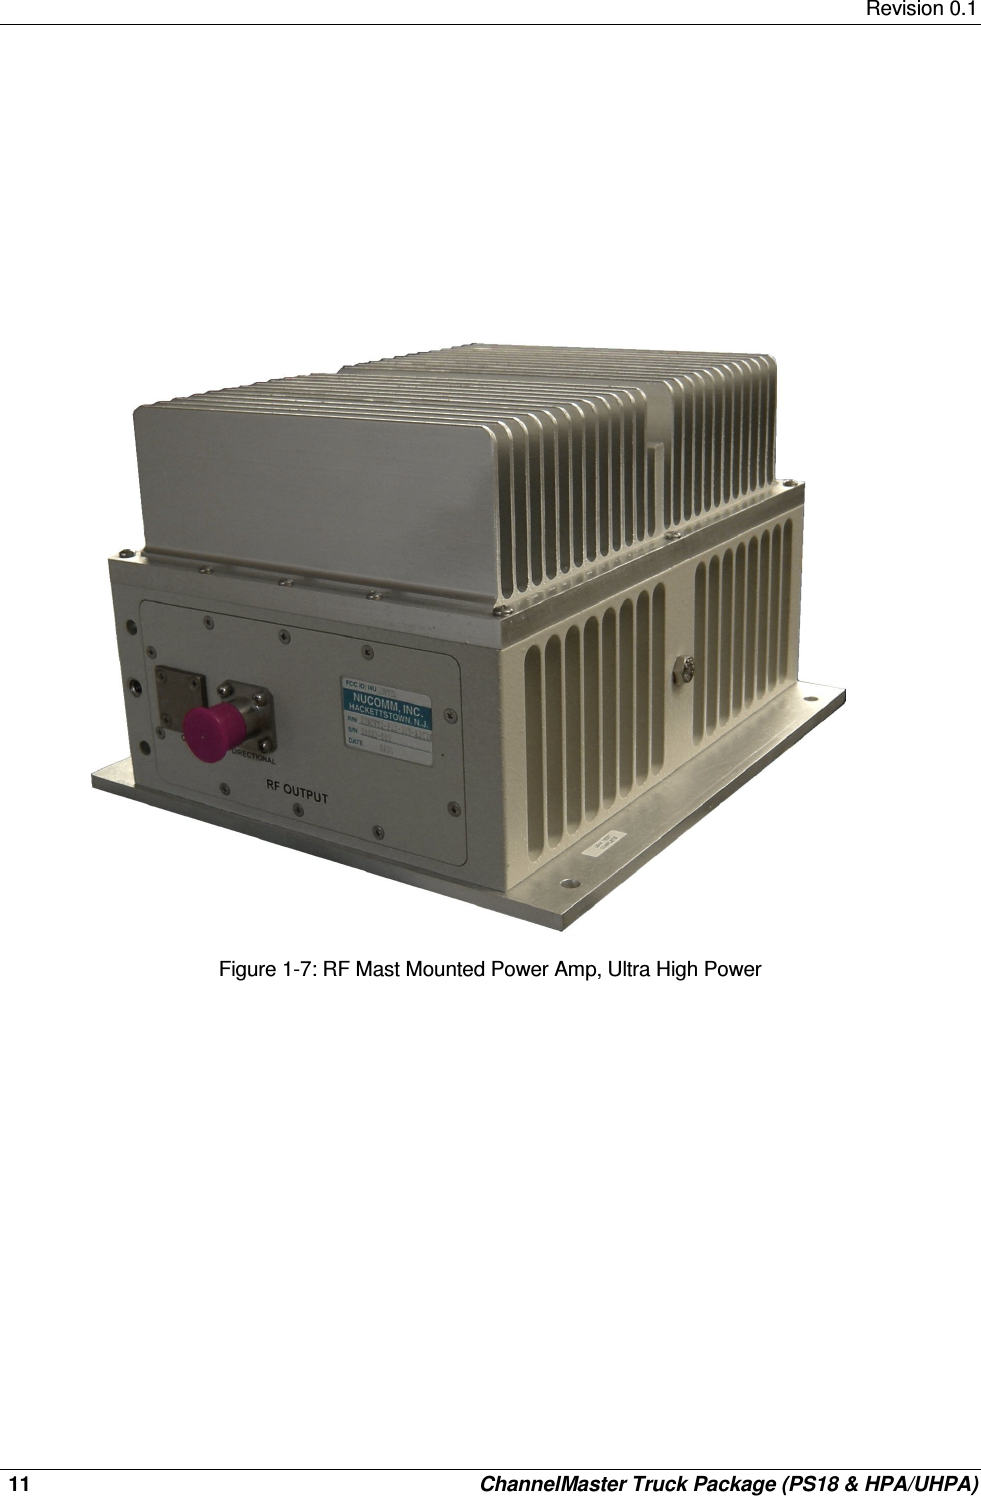     Revision 0.1  11    ChannelMaster Truck Package (PS18 &amp; HPA/UHPA)                                      Figure 1-7: RF Mast Mounted Power Amp, Ultra High Power                     